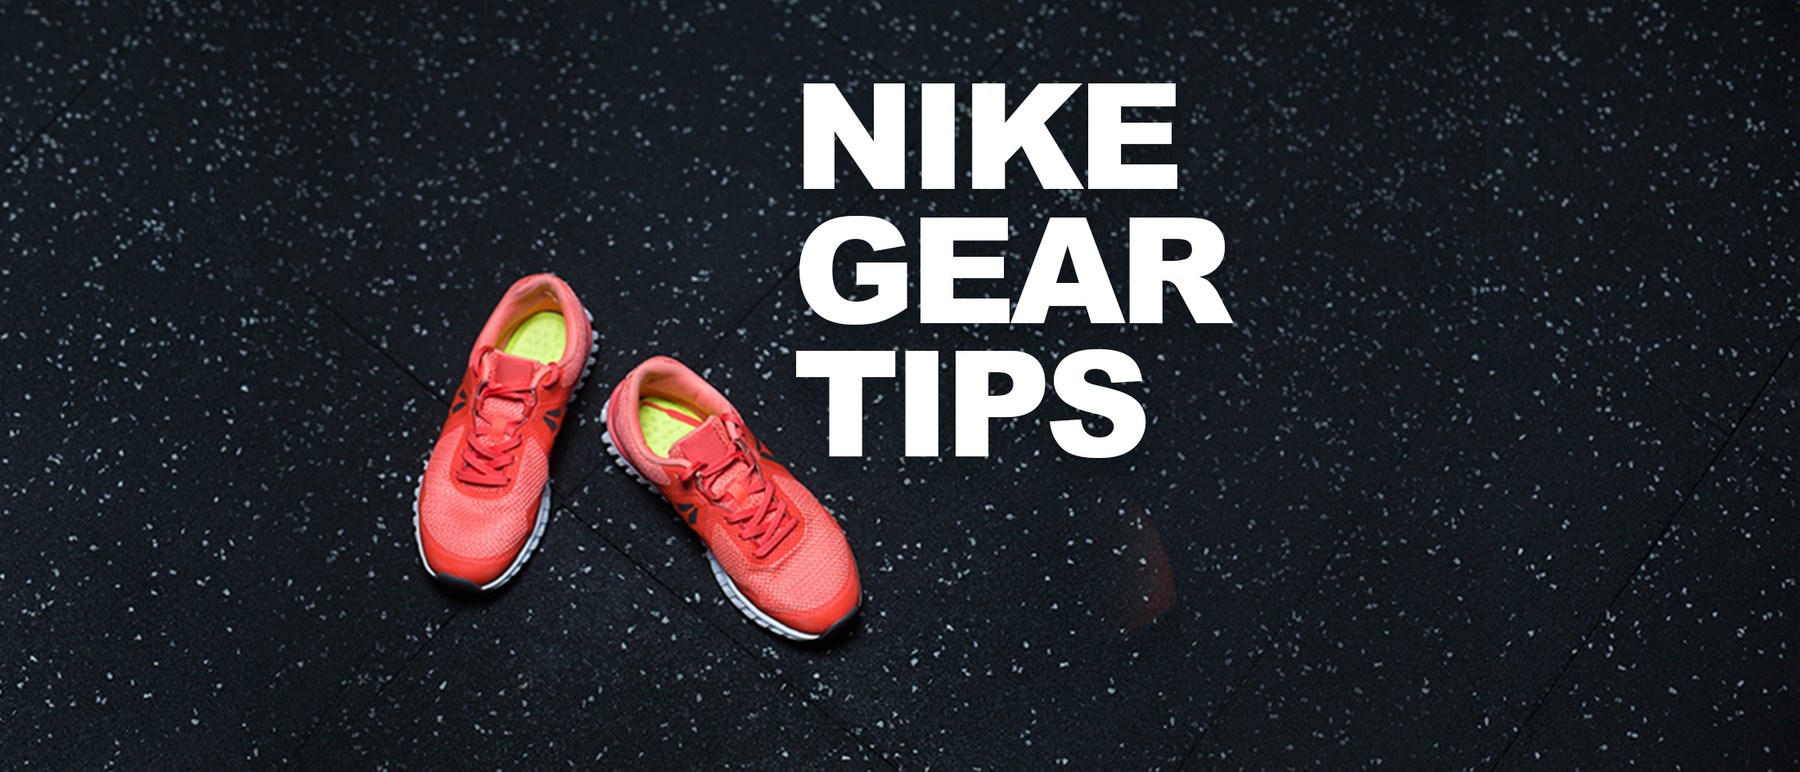 Pumped up Kicks: How to Score Cheap Nikes